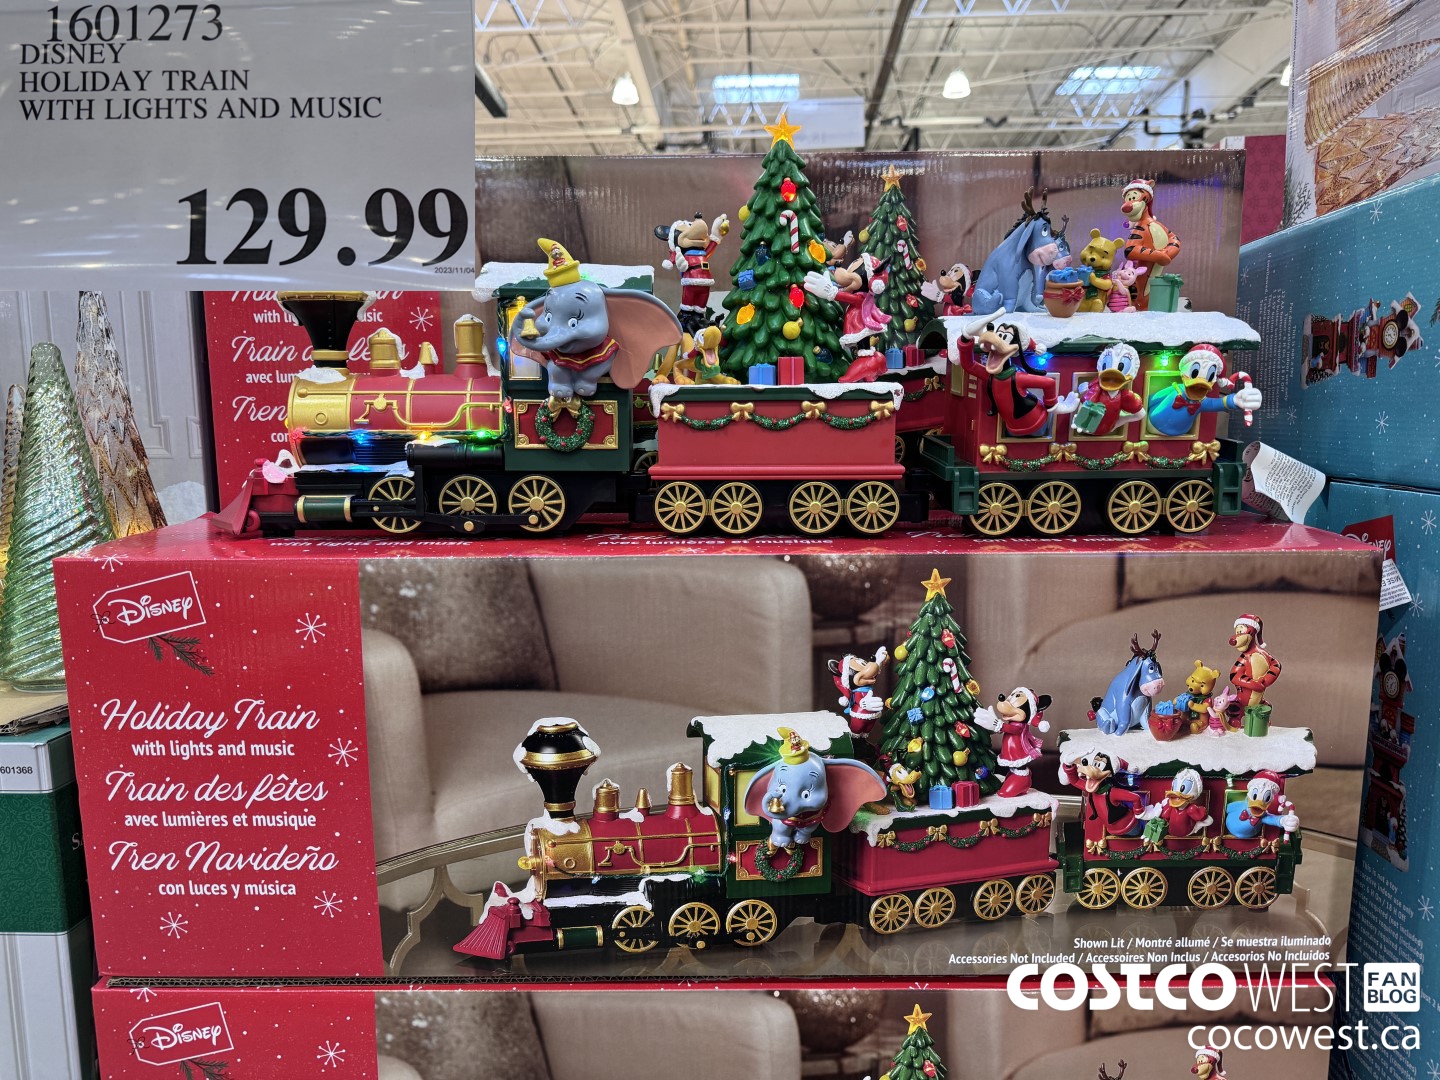 Costco Christmas: Best Deals & When To Shop - The Krazy Coupon Lady